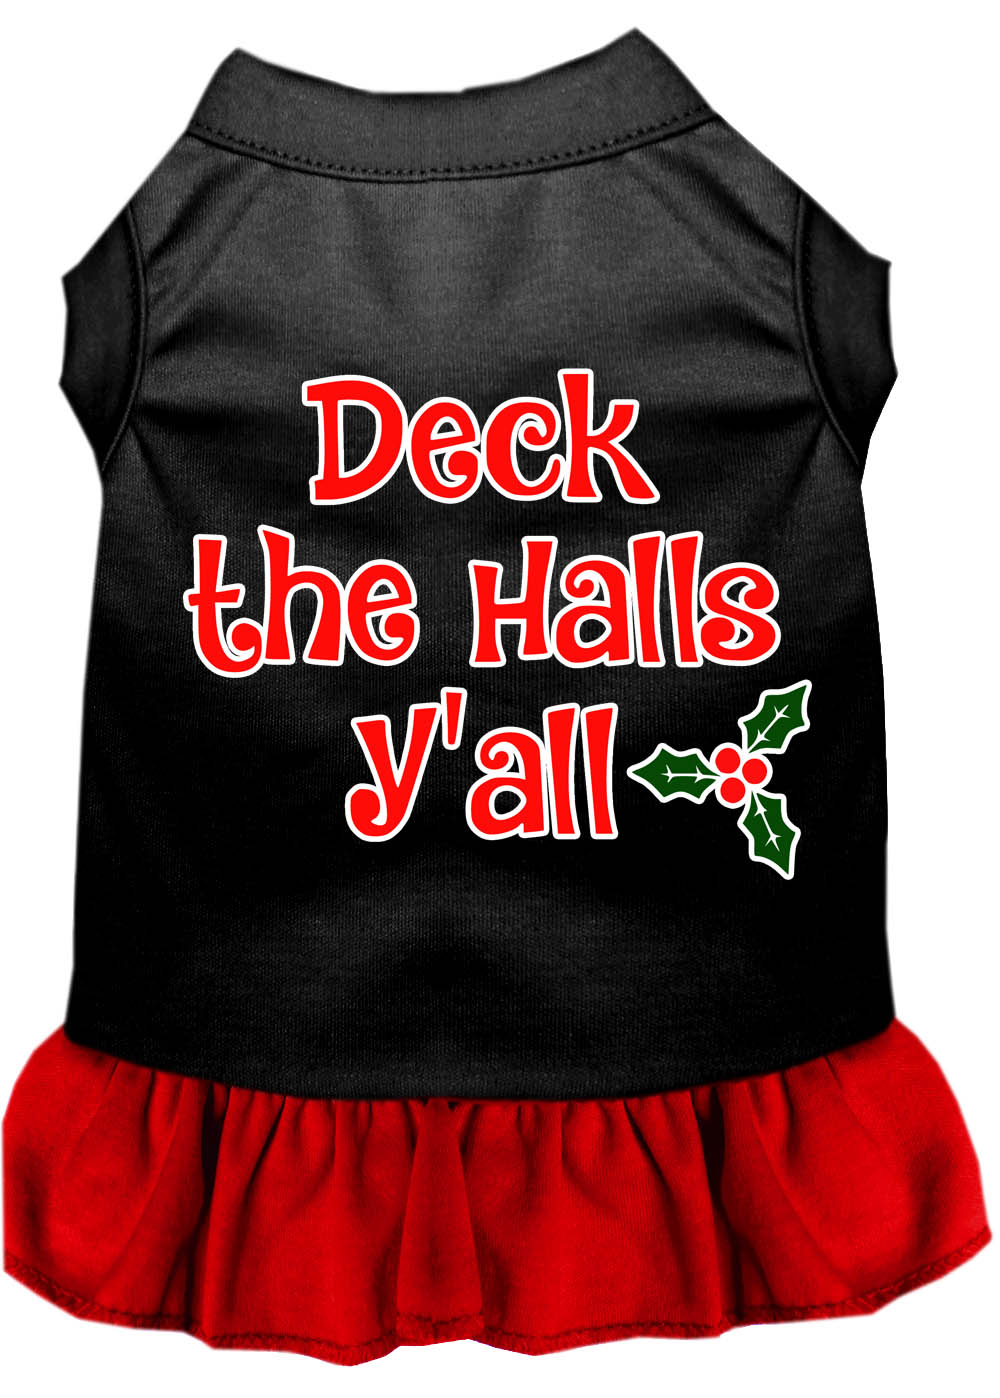 Deck the Halls Y'all Screen Print Dog Dress Black with Red XL